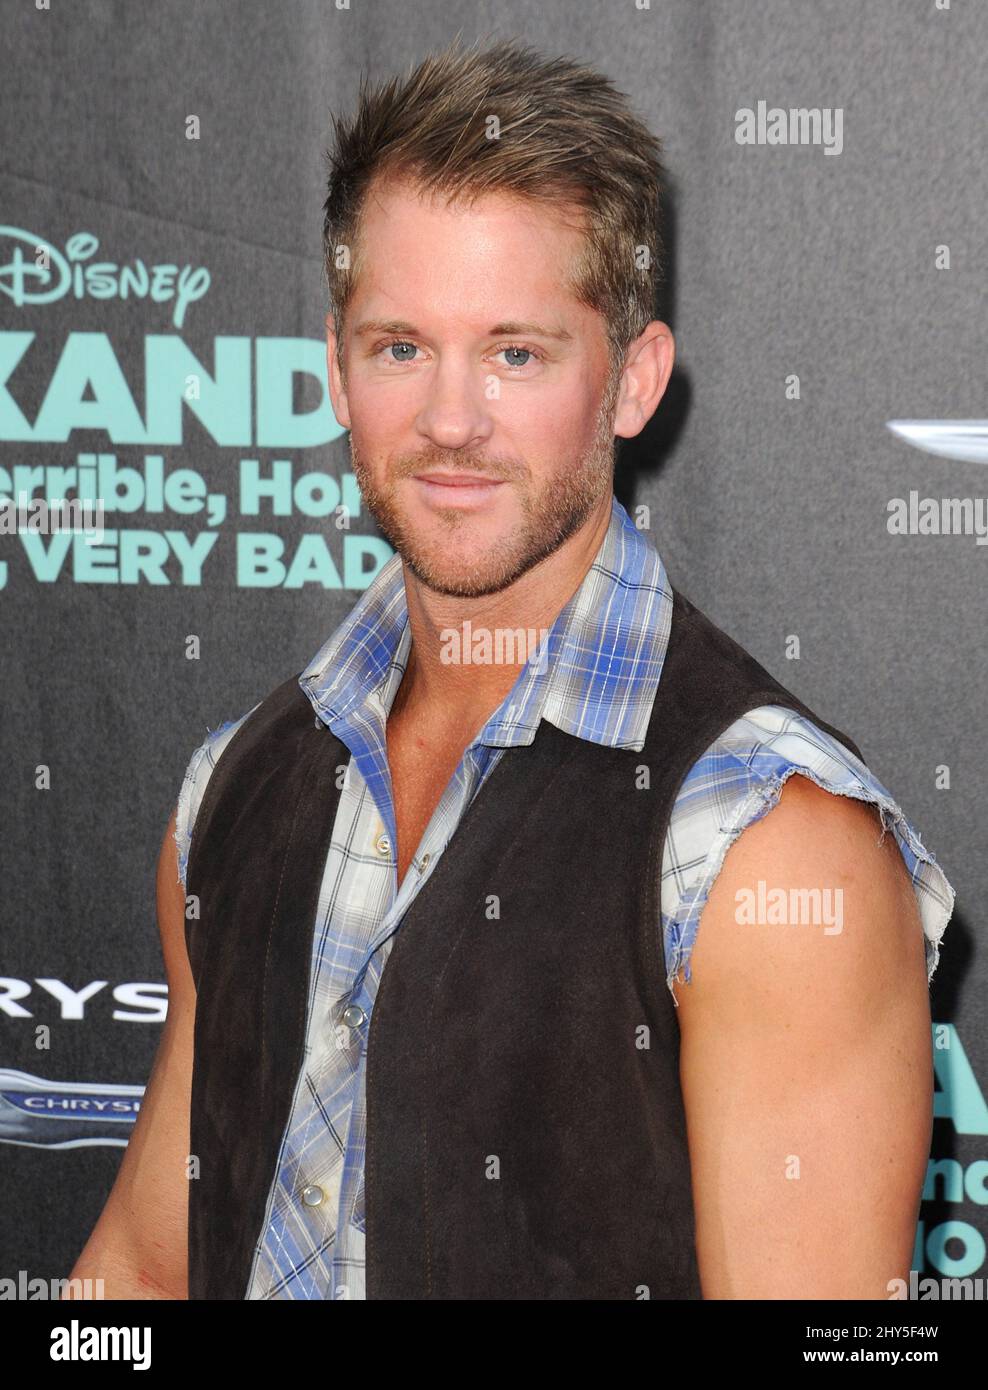 'Thunder from Downunder' arrives at the premiere of 'Alexander And The Terrible, Horrible, No Good, Very Bad Day' at the El Capitan Theatre, Los Angeles Stock Photo